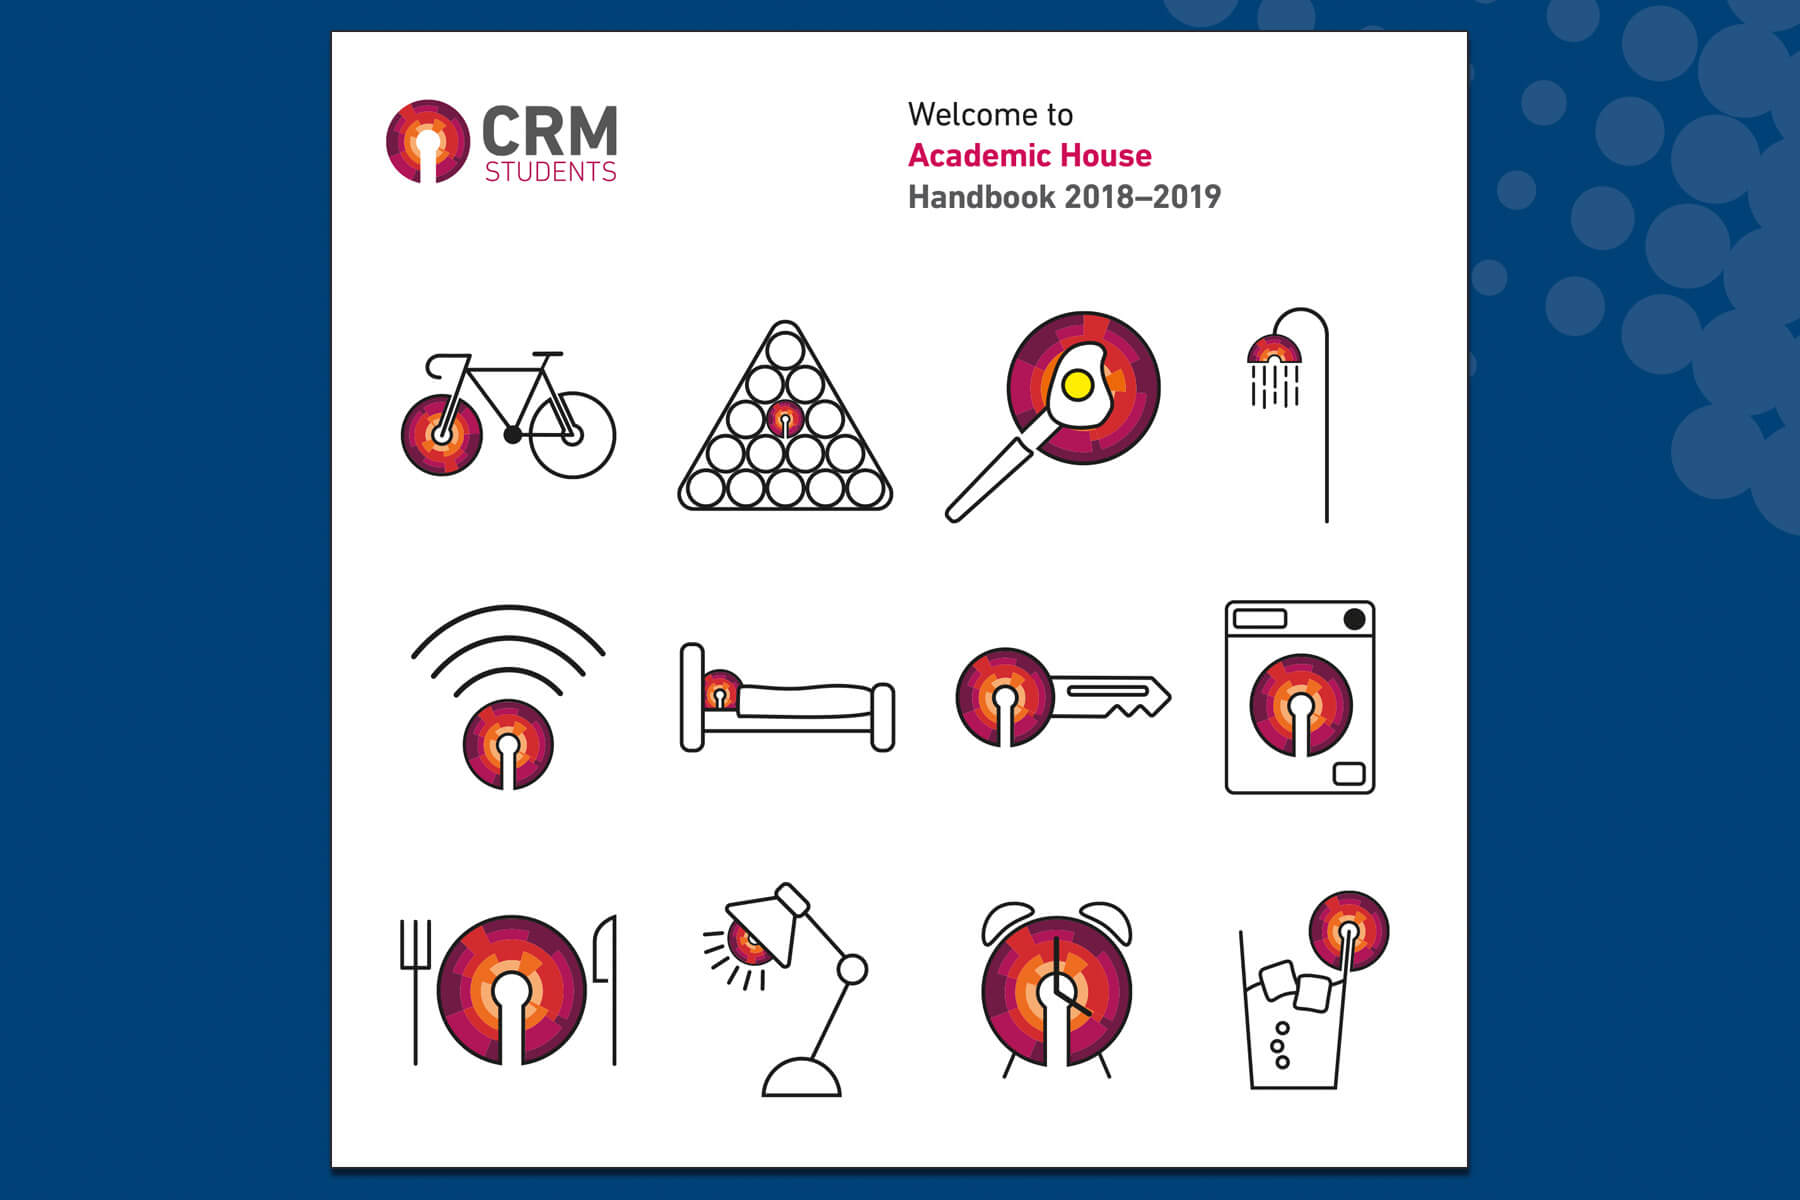 <div class="overlay" style="background-image: url('/Portals/_default/Skins/HolyWellPress/Thumbnail-Corner-Dots.svg')">
<div class="overlaytext">
<h2>icon design and campaign design</h2>

<h3>CRM Students</h3>
</div>
</div>
